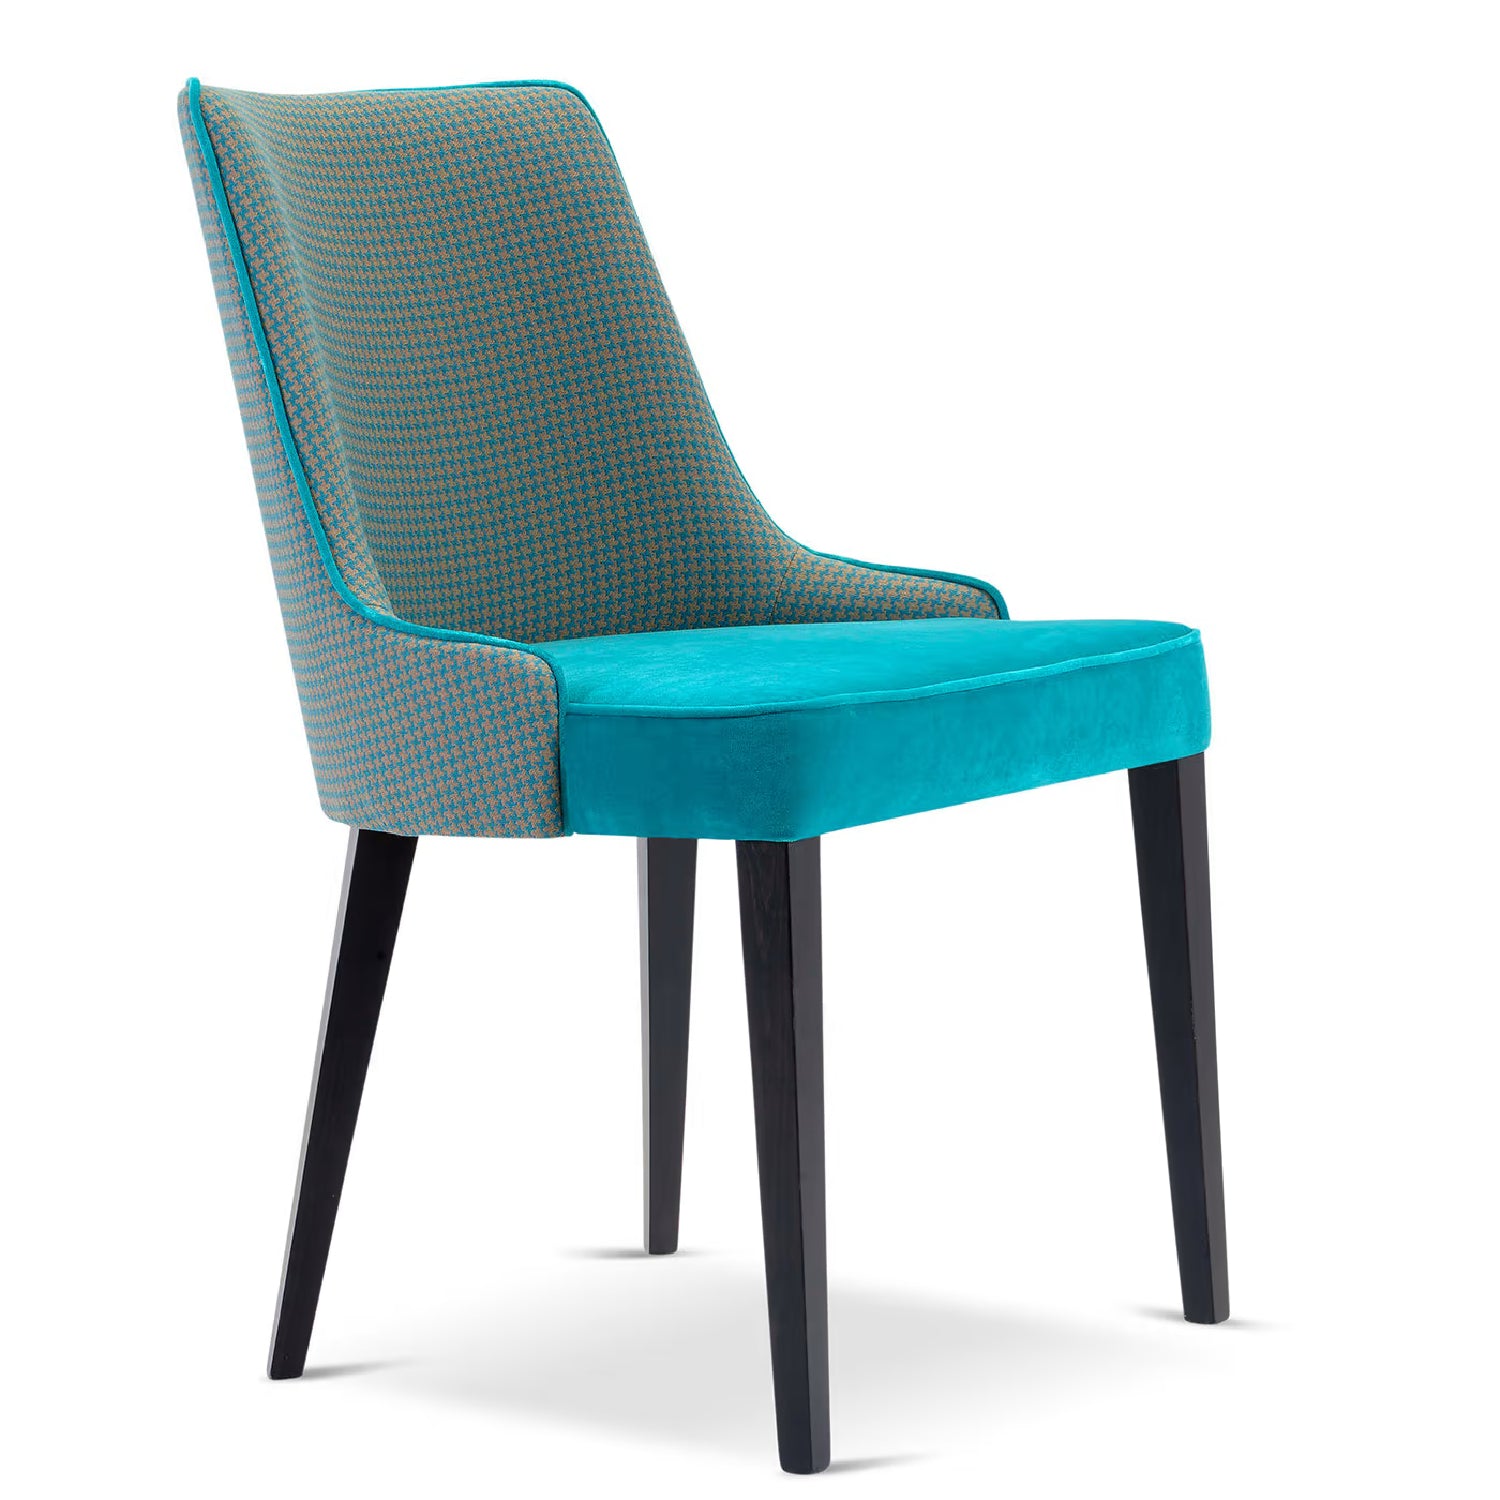 Pat Stylish Turquoise and Grey Chair by Domingo Salotti